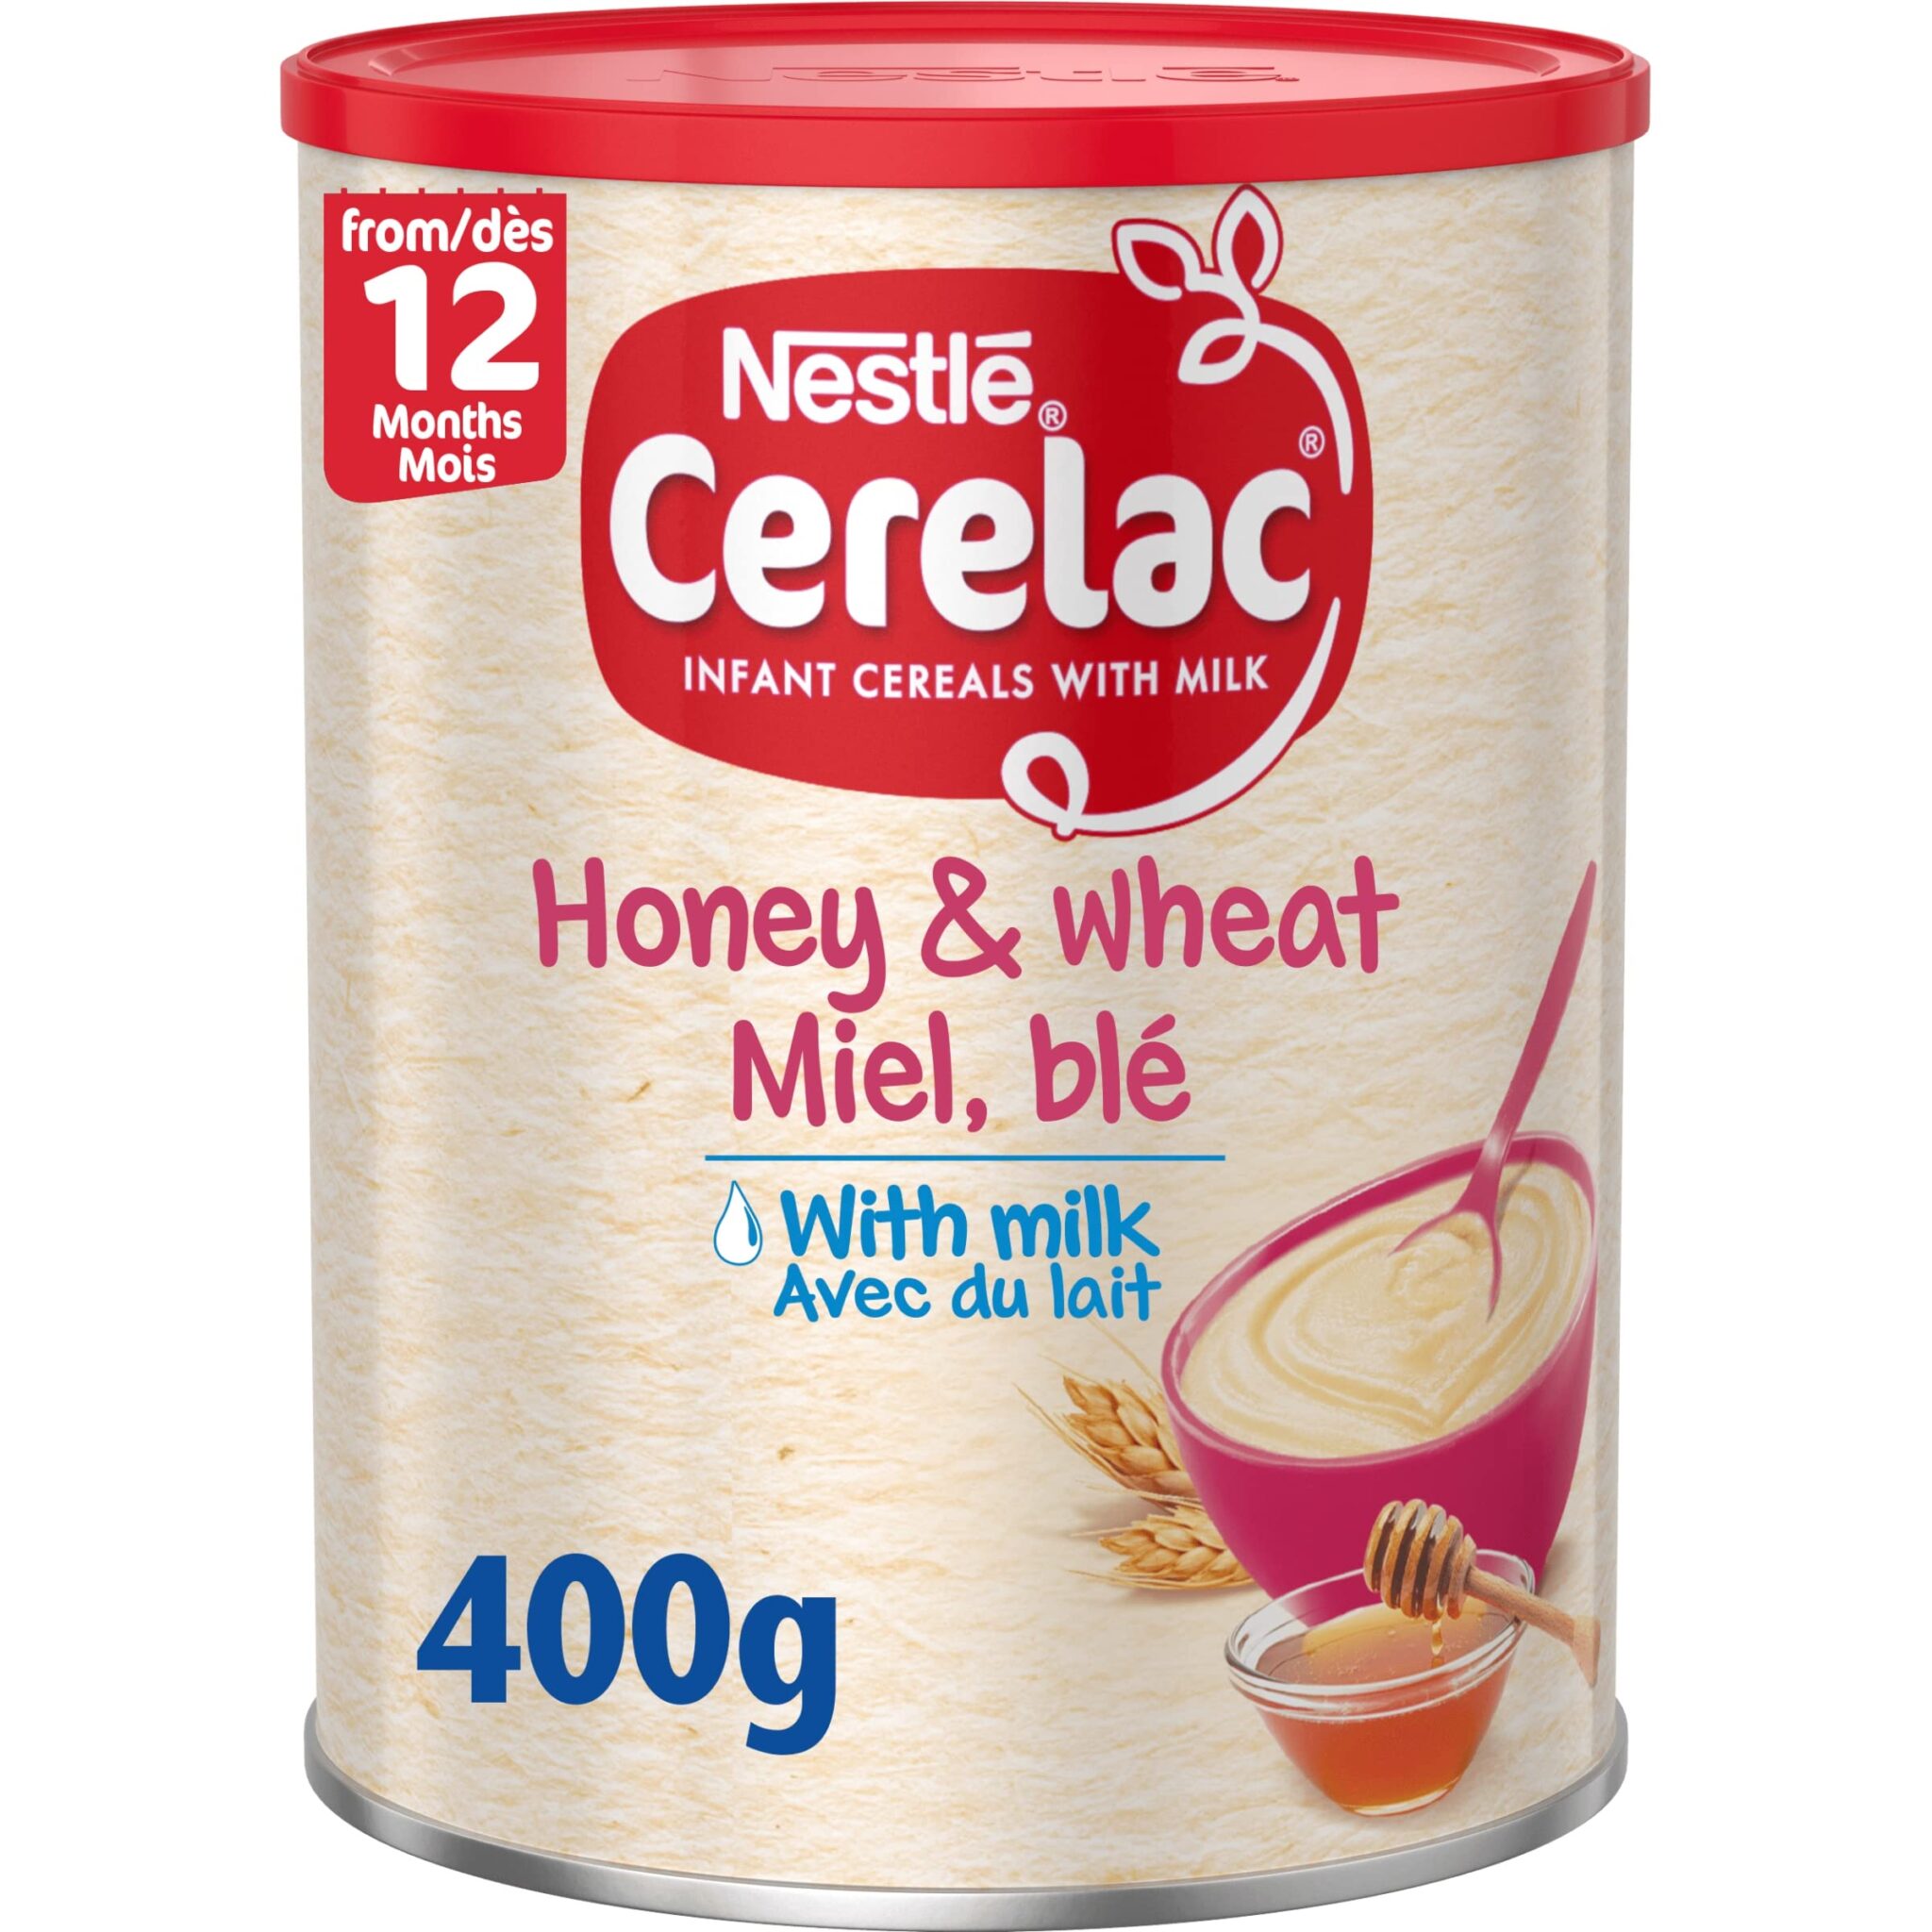 NESTLE CERELAC HONEY AND WHEAT INFANT CEREAL WITH MILK 400g